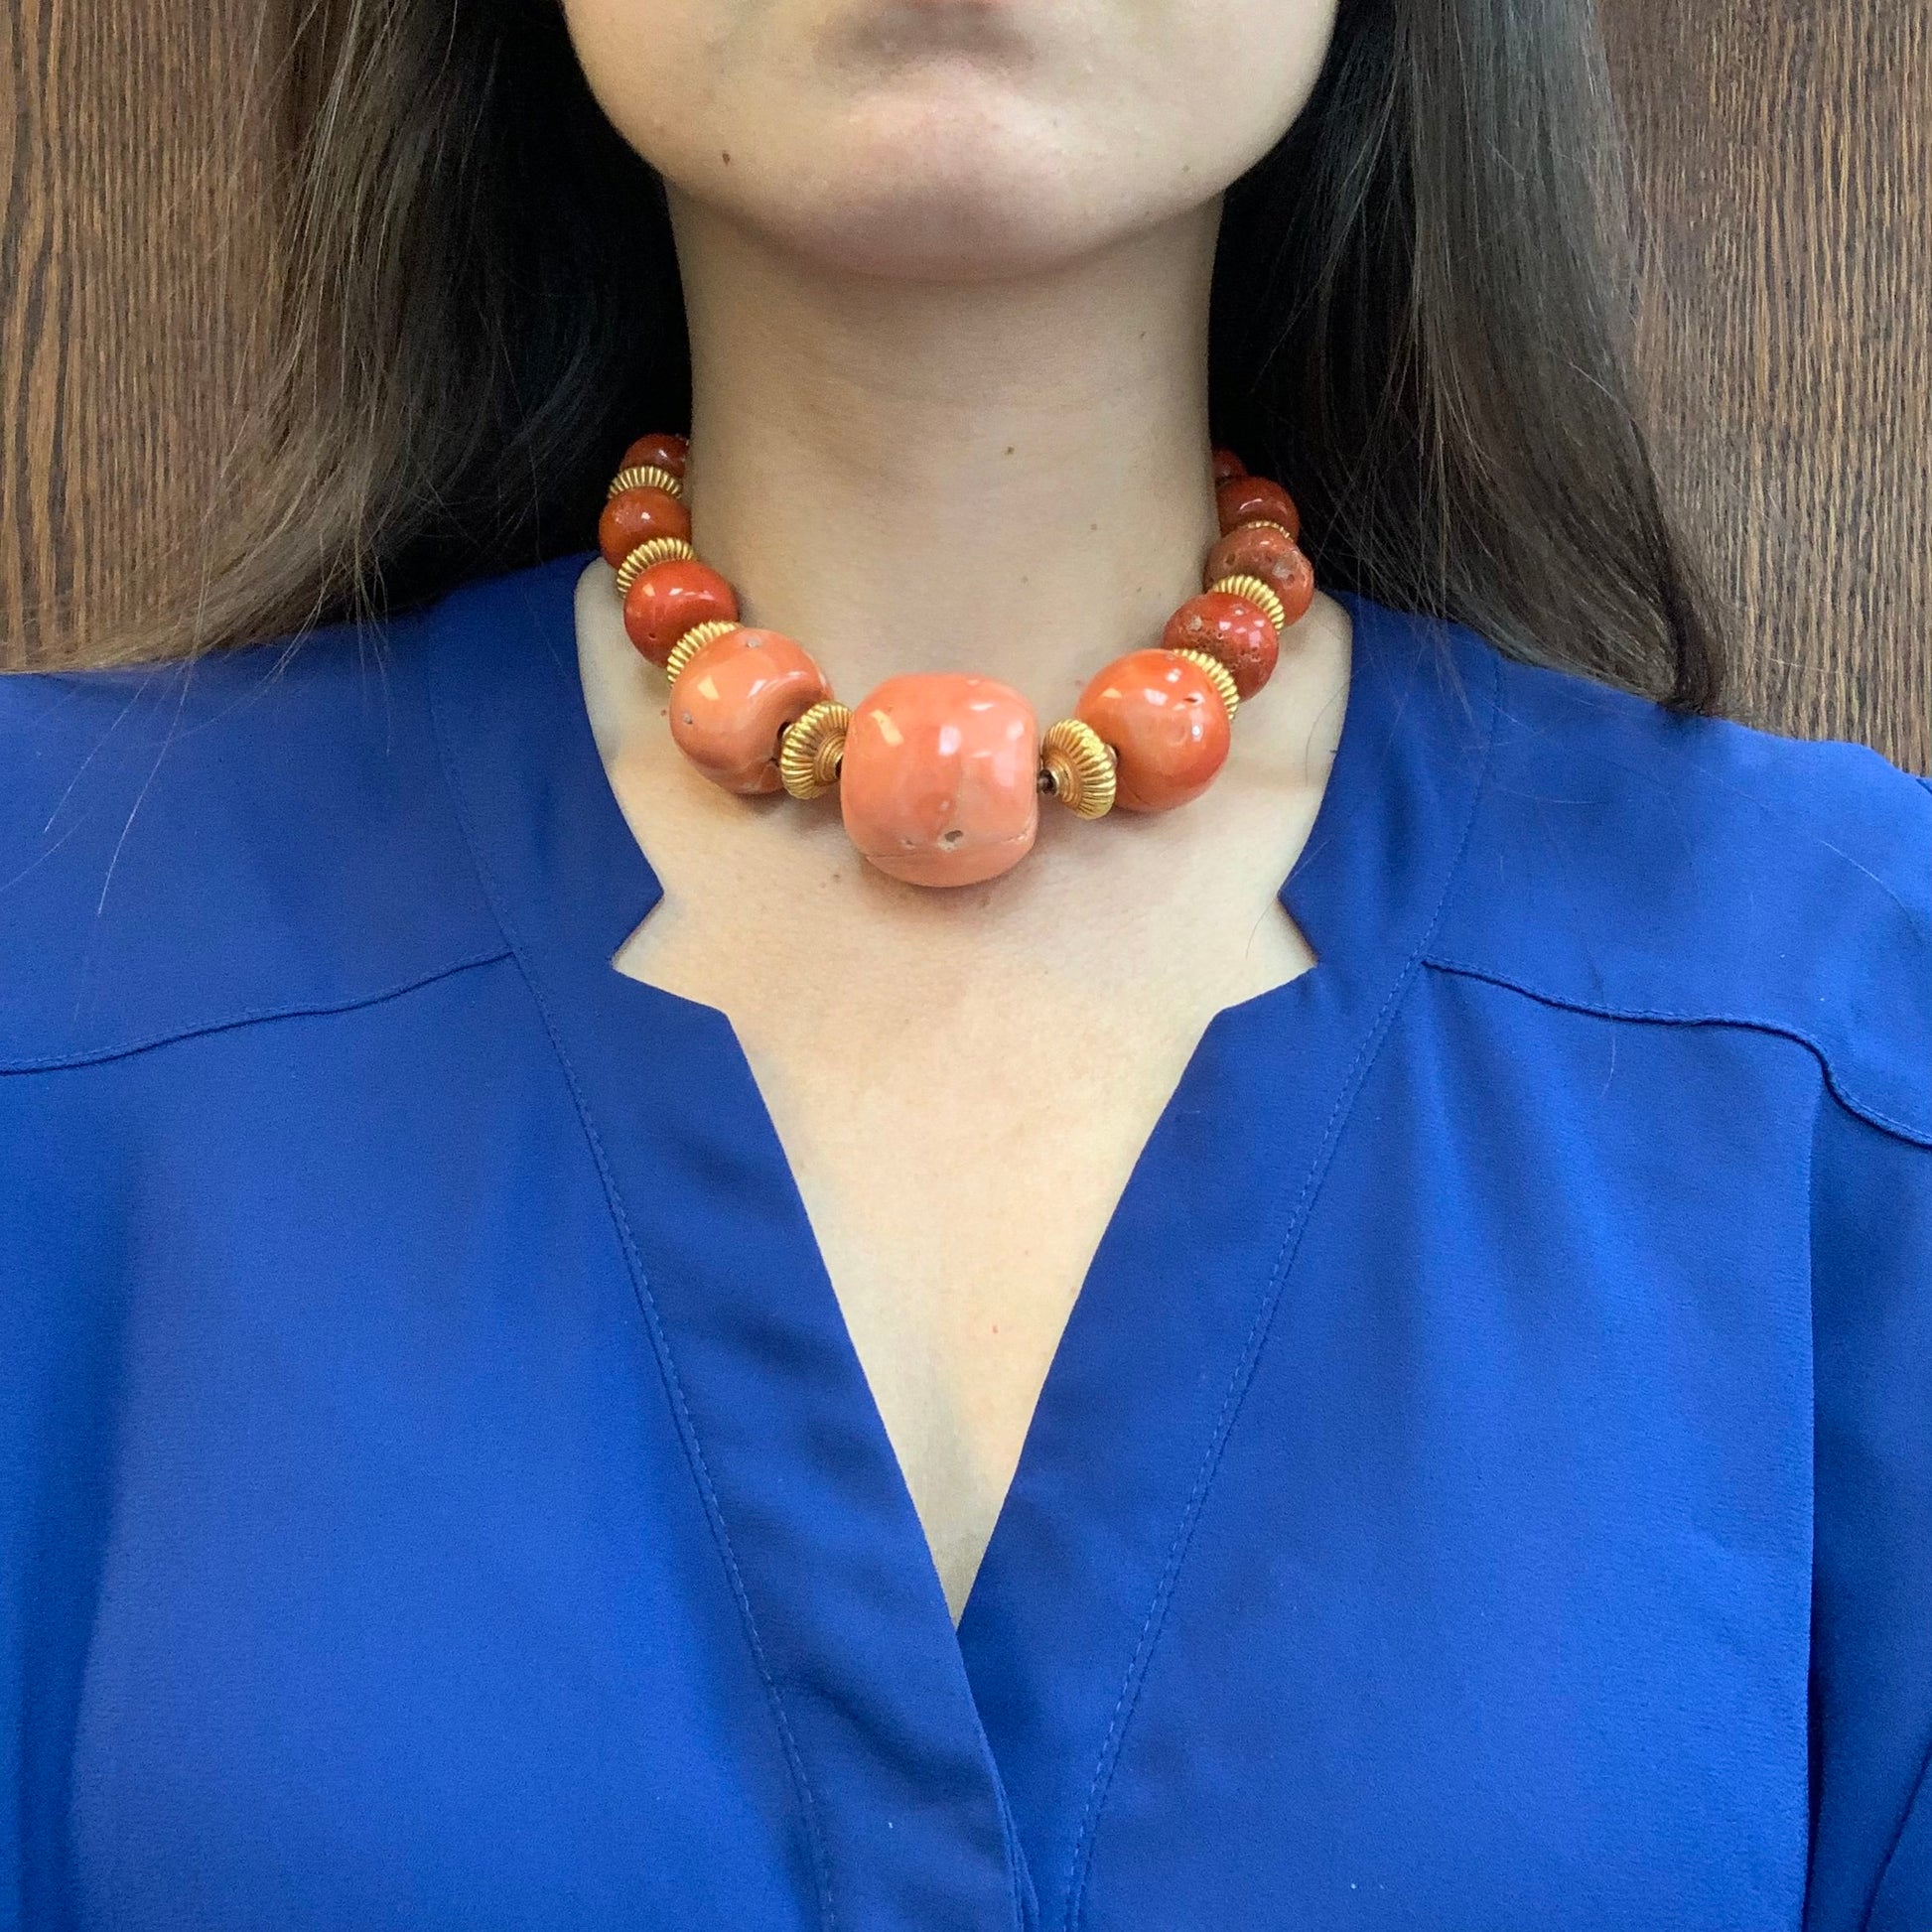 Fulco Di Verdura 1970s 18KT Yellow Gold Coral Necklace worn on neck